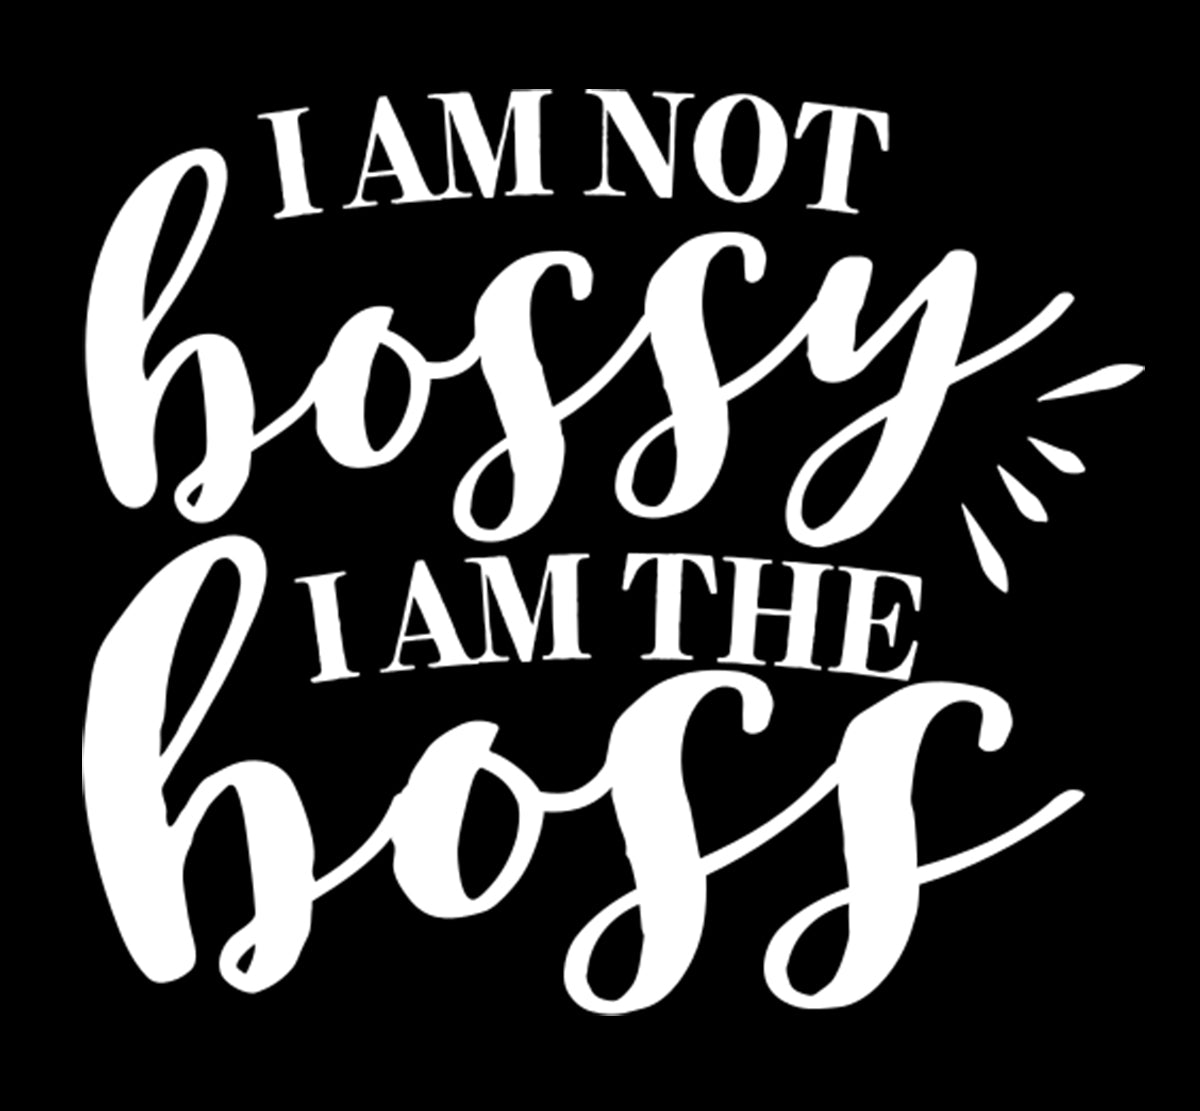 I am not bossy I am the boss Nail Art Nail Water Decals Wraps